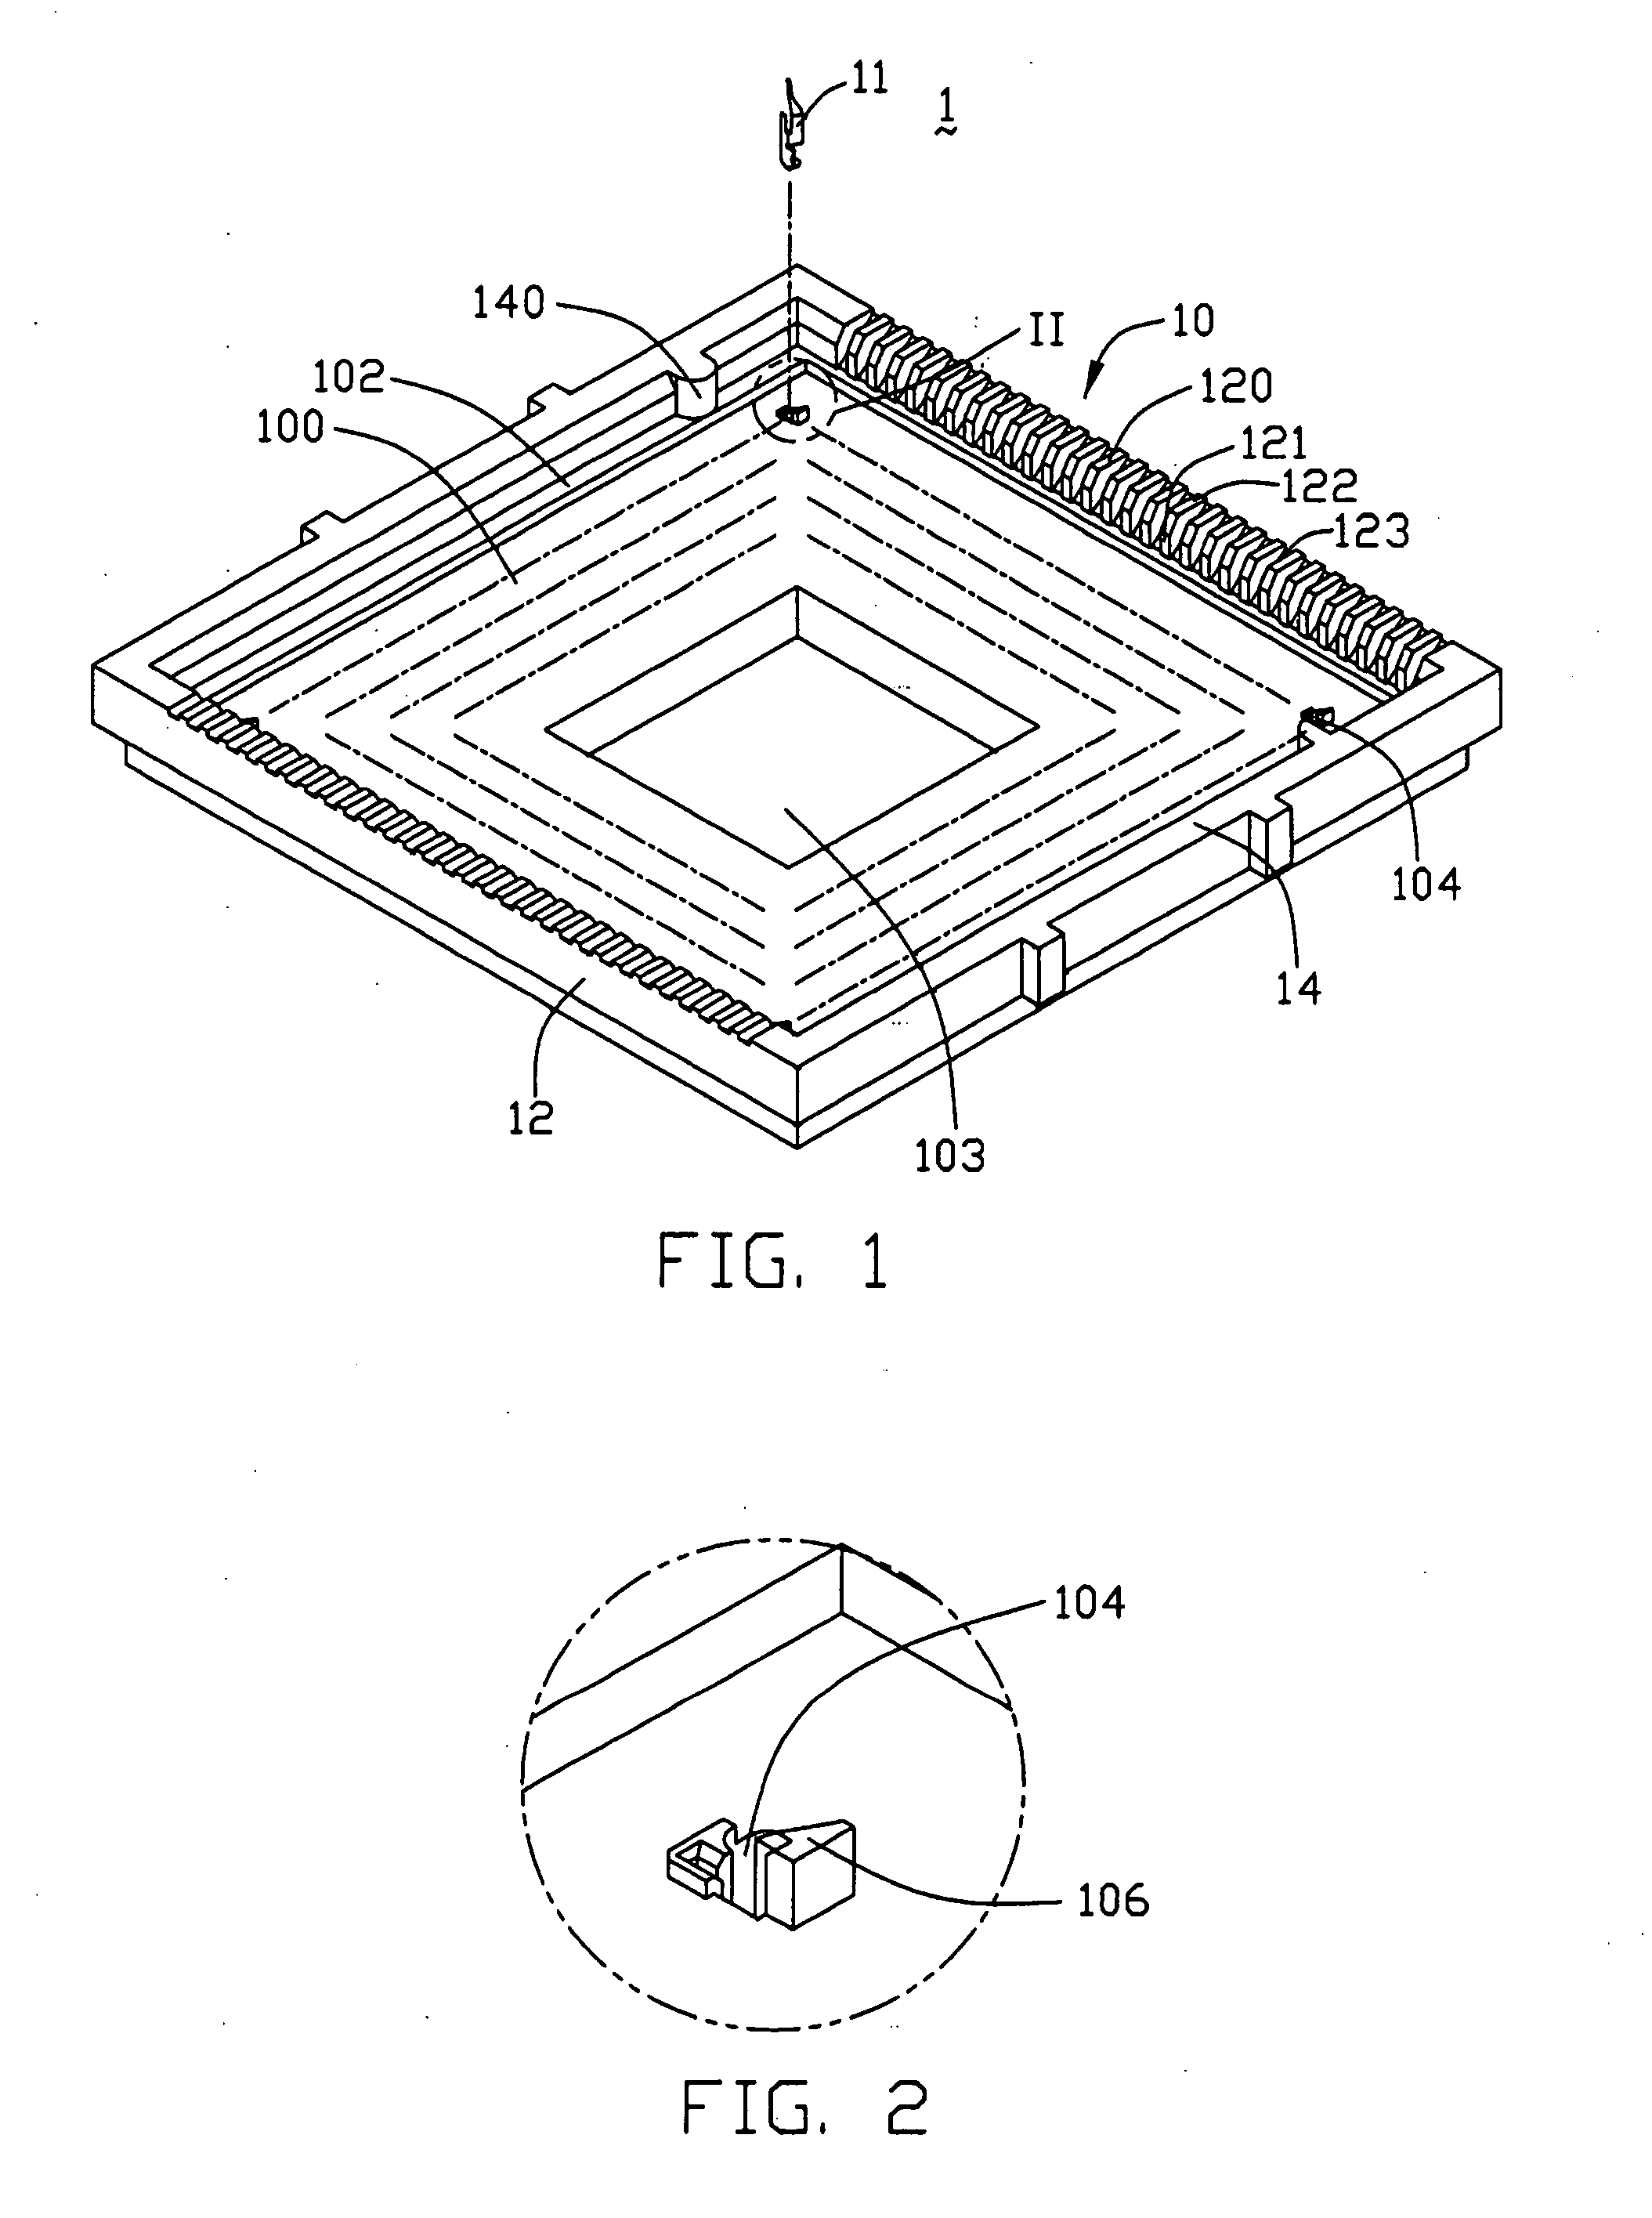 Electrical connector with dual-function housing protrusions